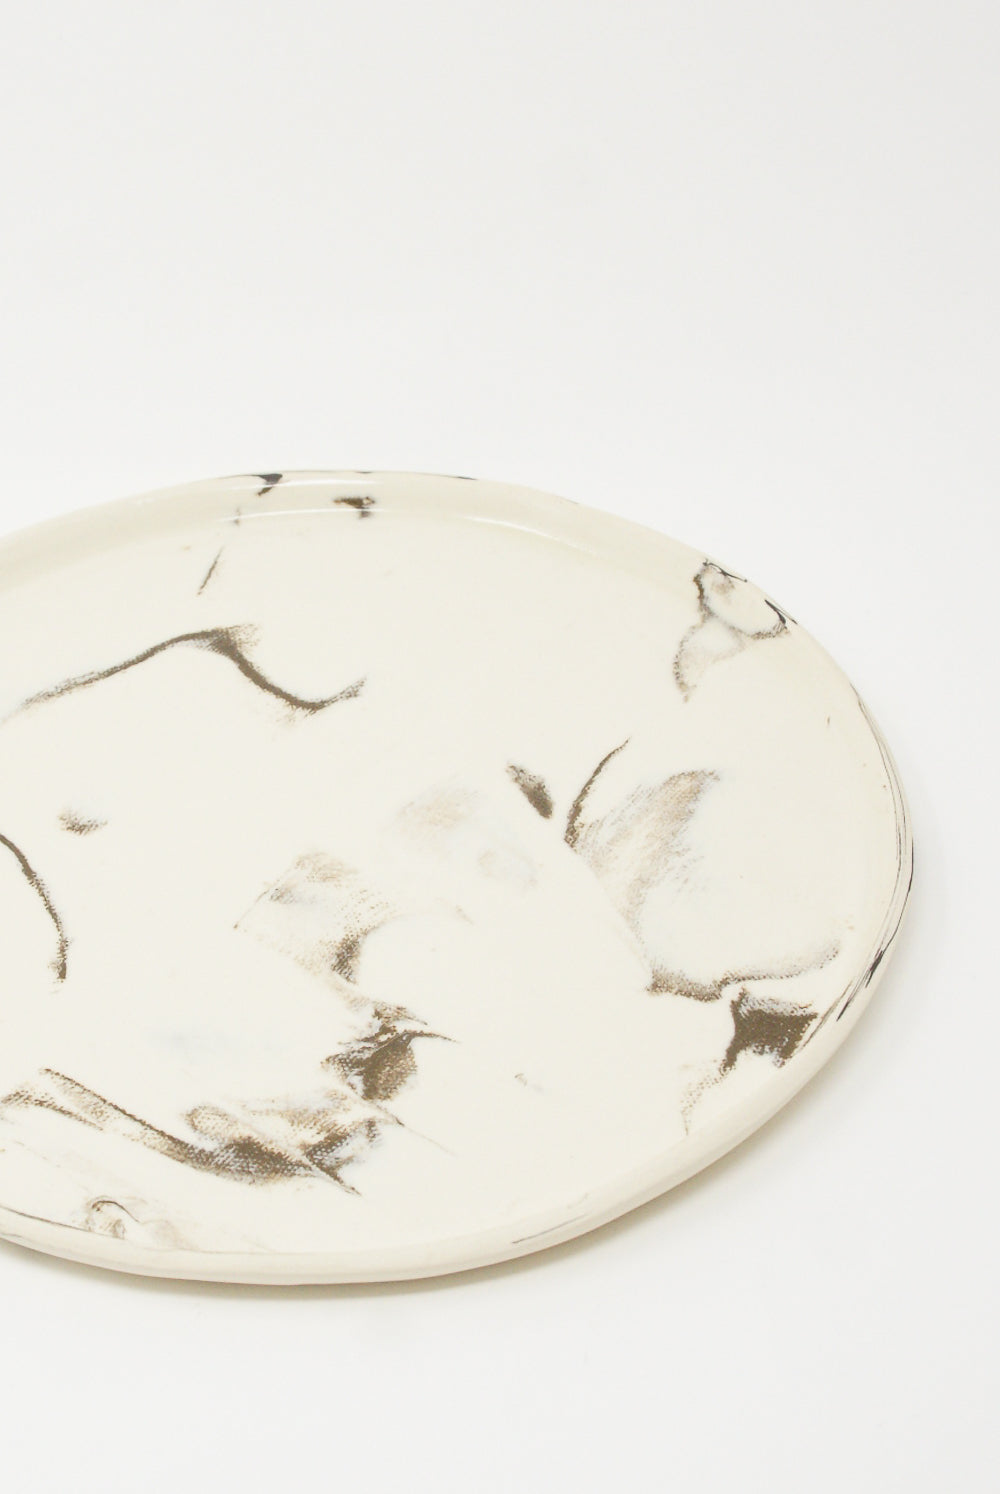 Lost Quarry Marbled Fields Platter in Mixed Marbled Clay - White/Black side view detail